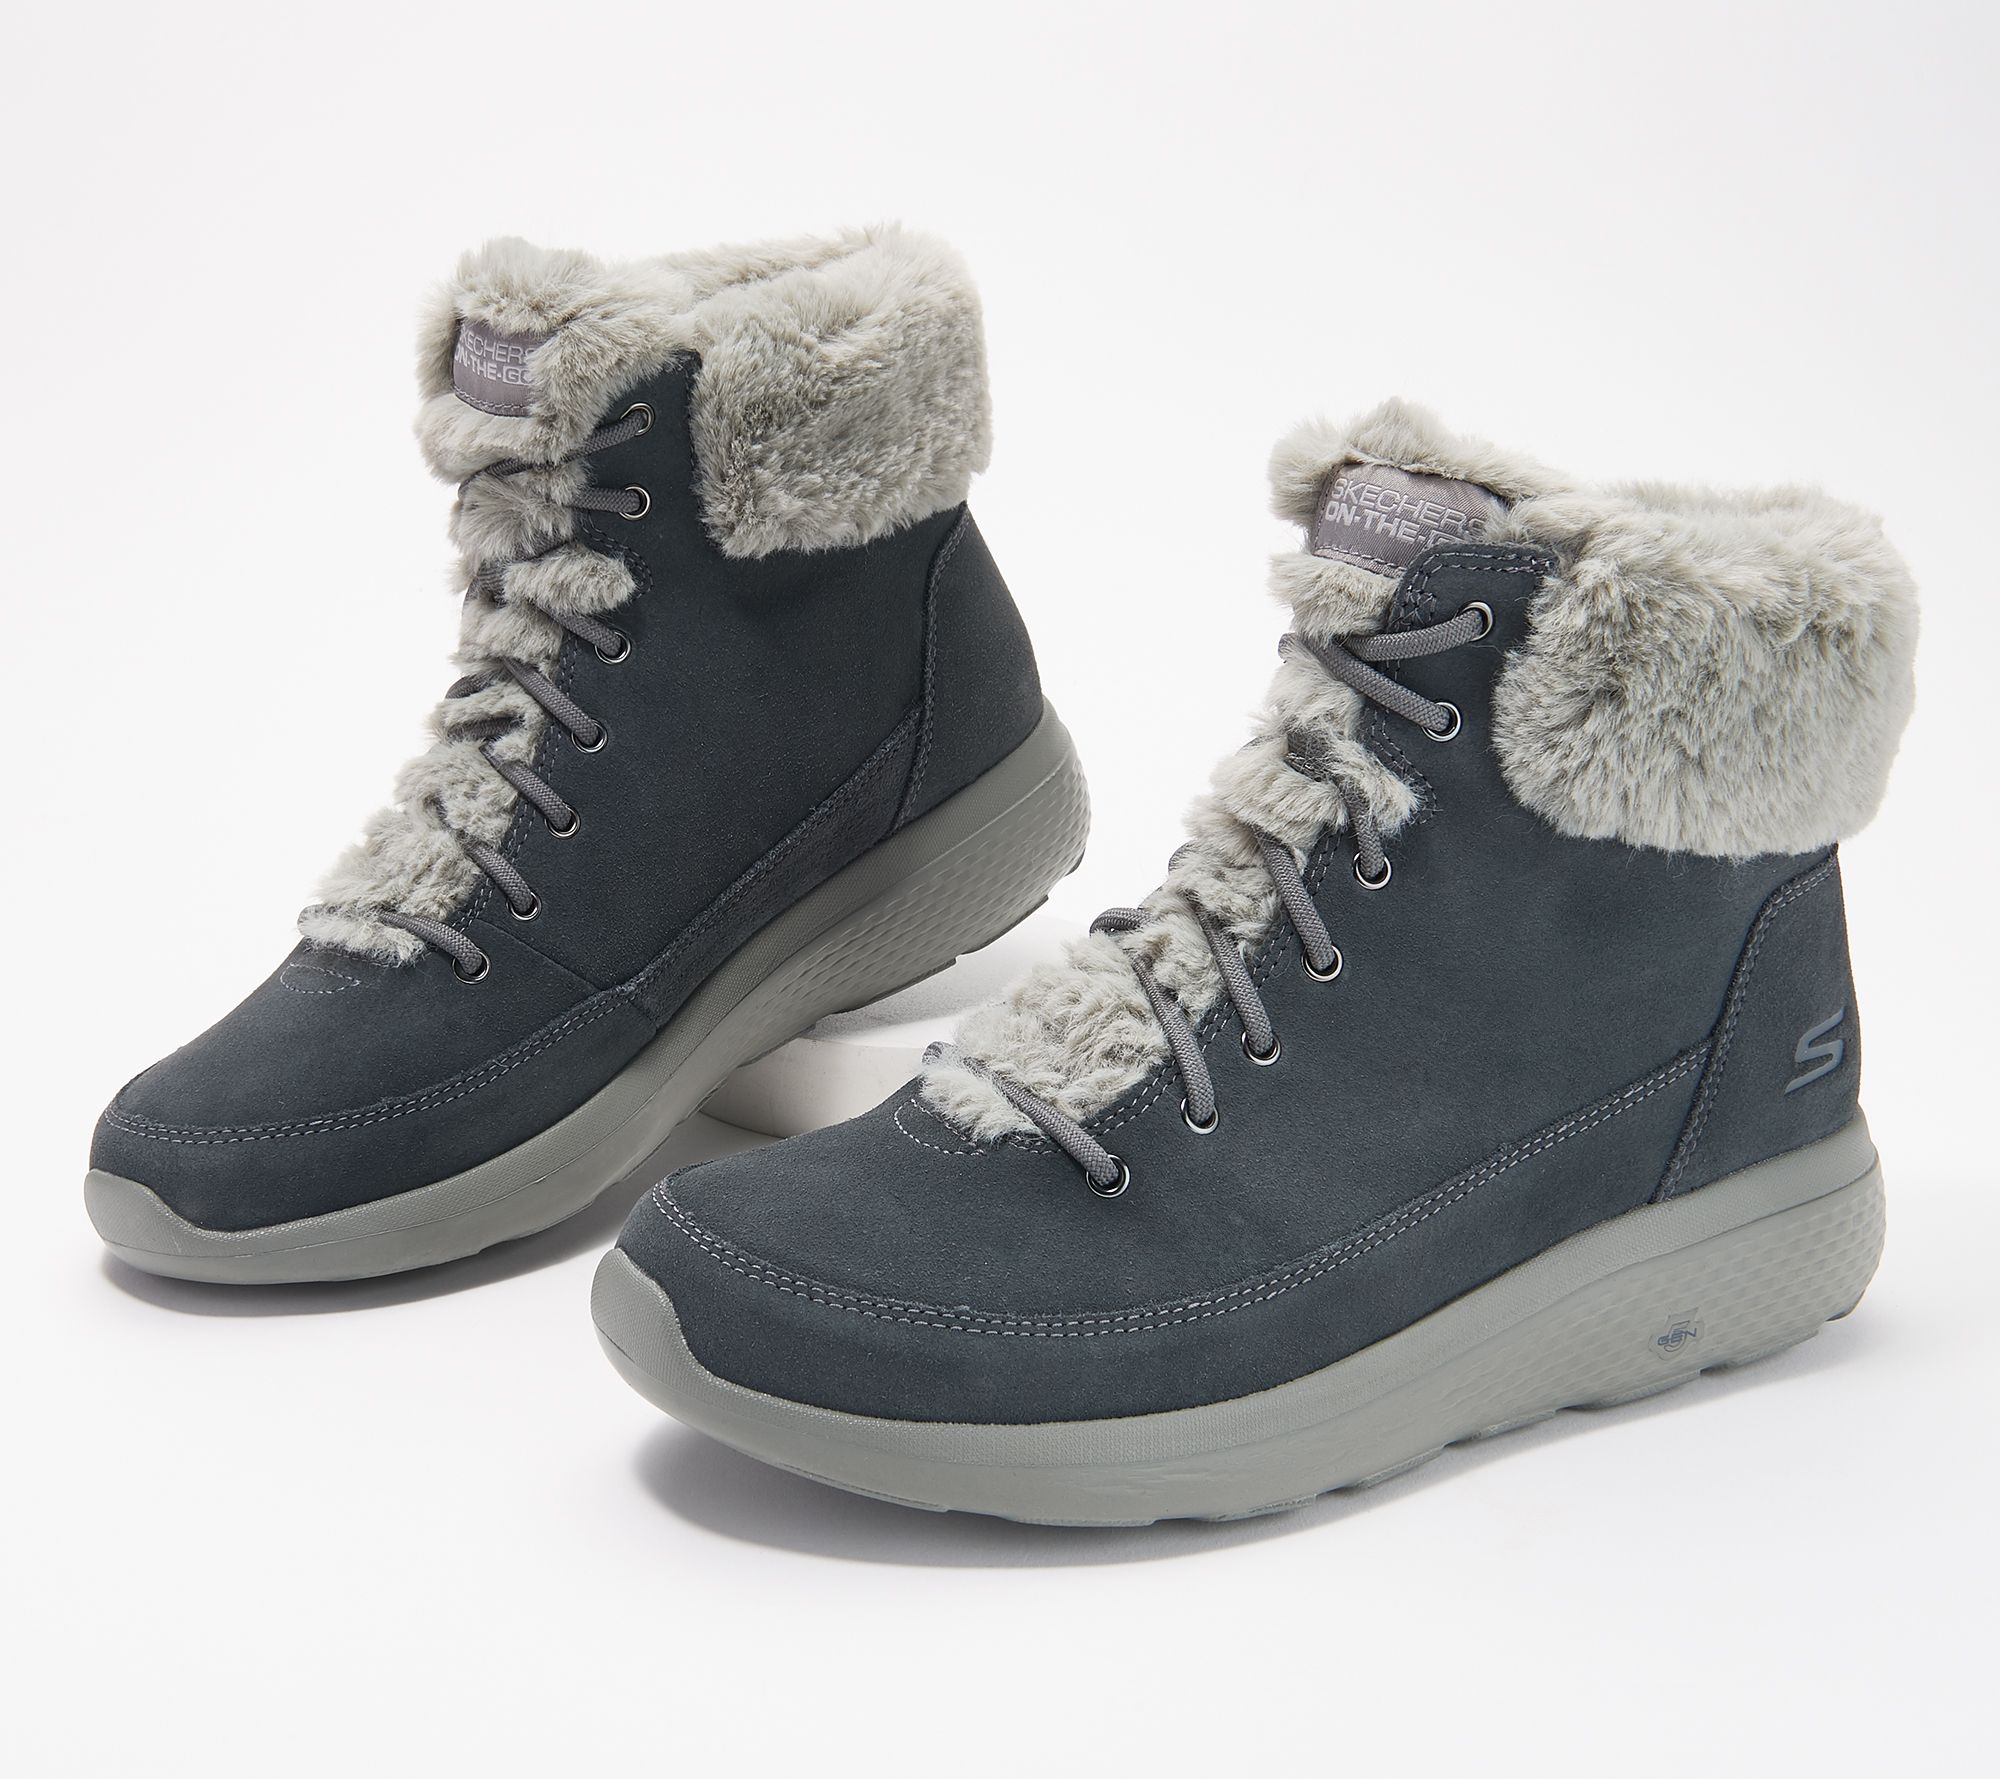 skechers winter ankle boots